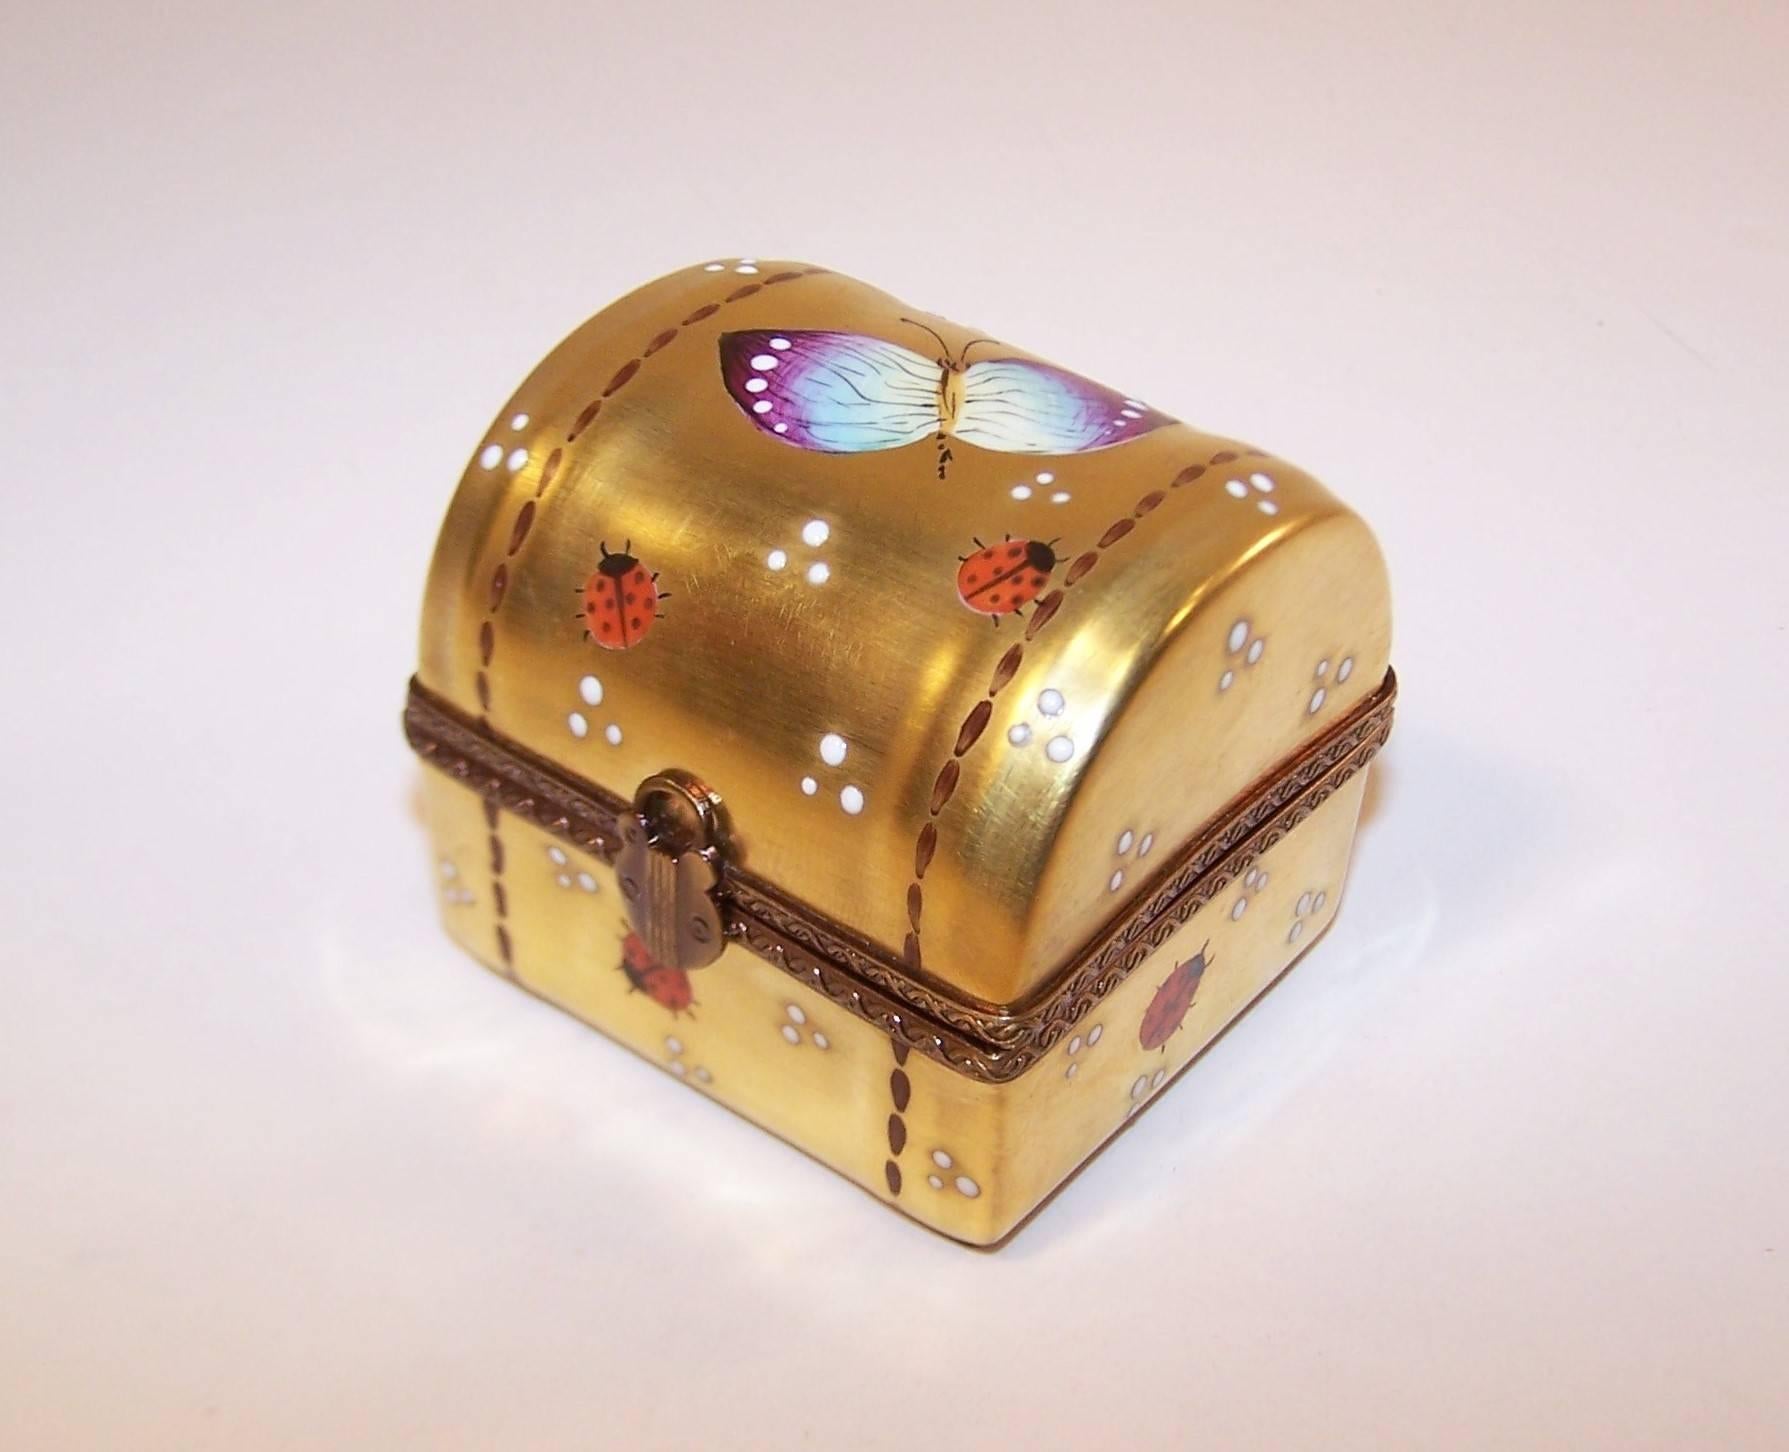 This French limoges porcelain trinket box resembles a miniature treasure chest complete with a padlock closure and faux stitched details.  It is charmingly hand painted with a butterfly and lady bugs on a rich golden background.  The interior opens